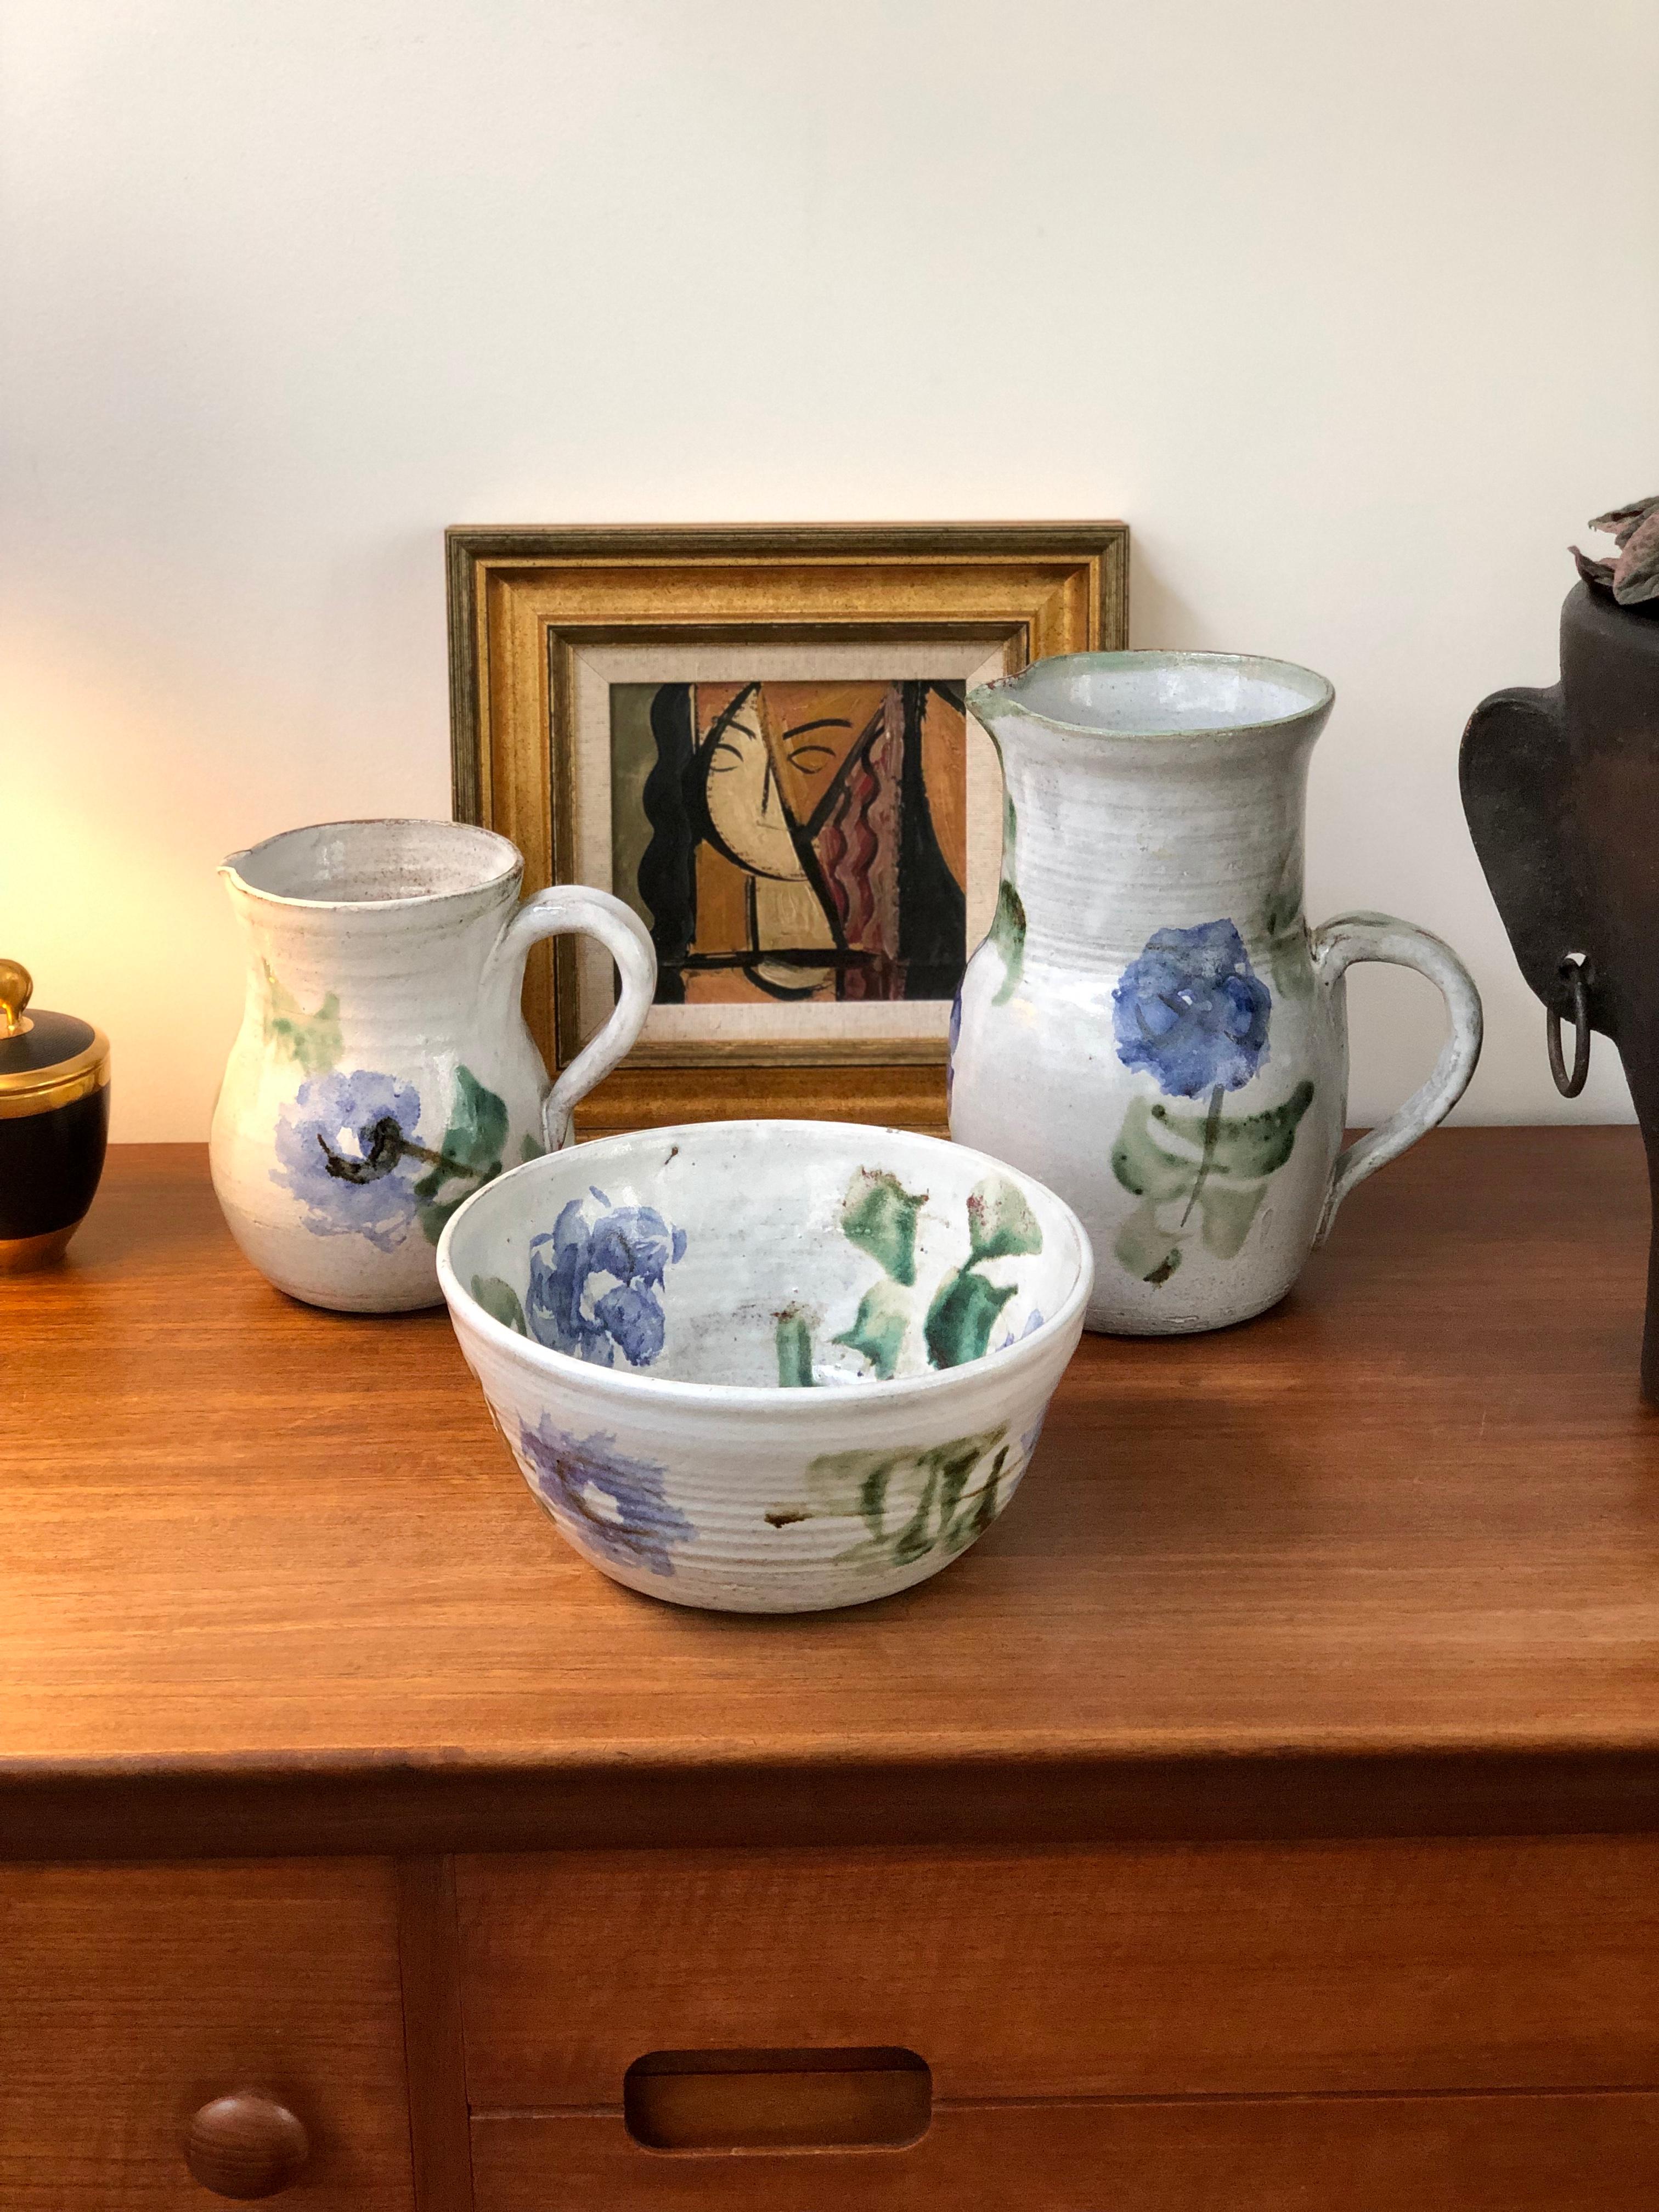 Midcentury ceramic pitcher (circa 1960s) by Albert Thiry (1932 - 2009). A classic Thiry design and decoration scheme, this pitcher's base color is done in a chalky-white glaze with painted blue flowers and trademark green leaves. It is elegantly